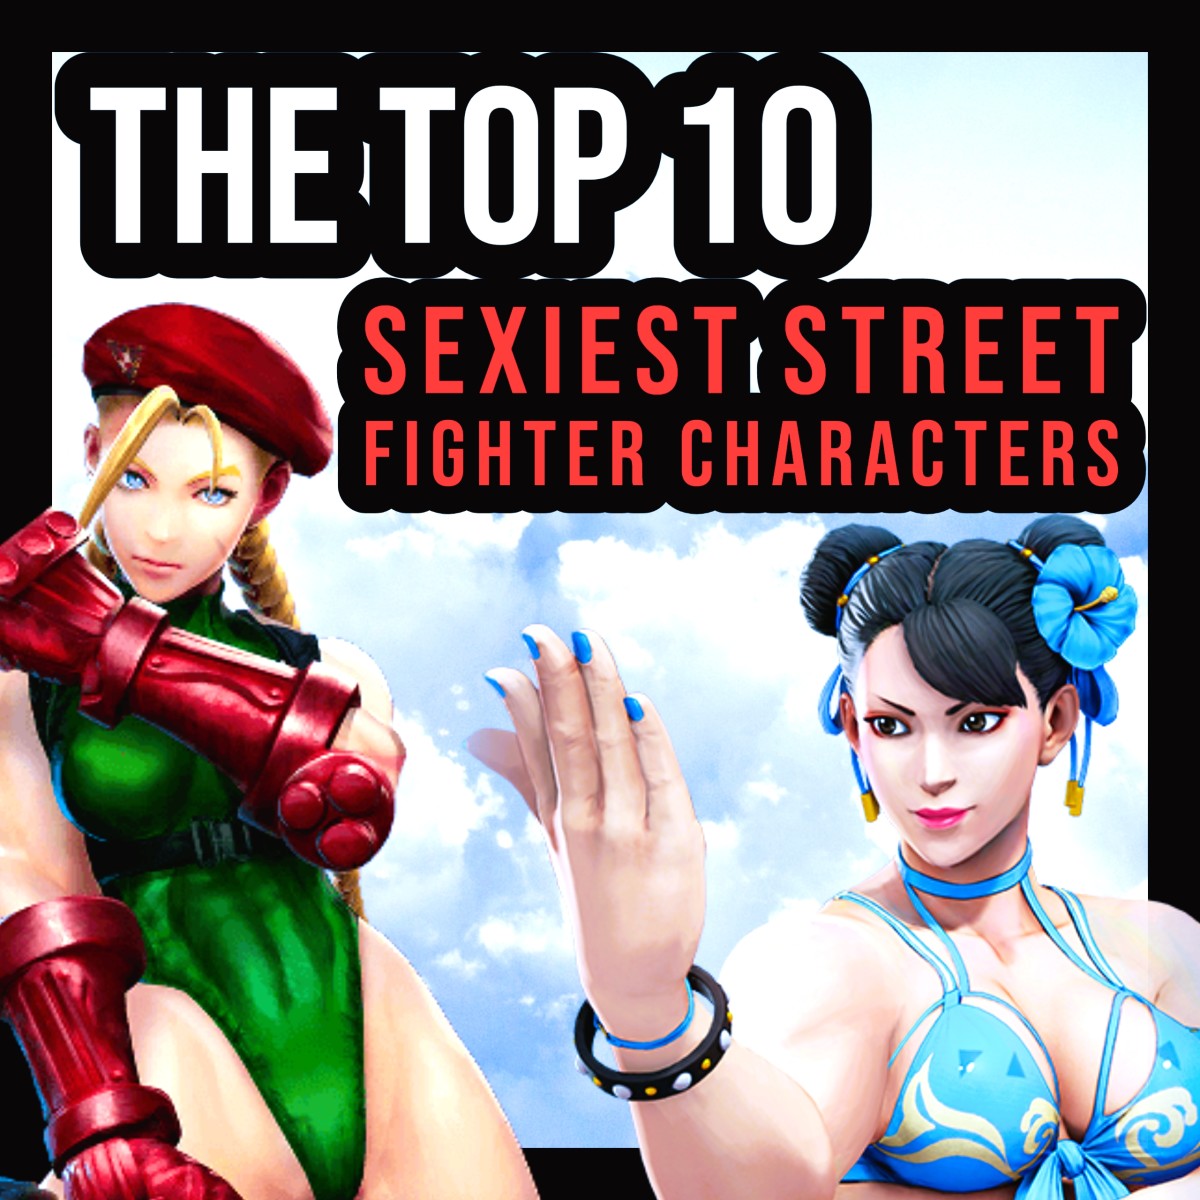 From Chun-Li to Cammy White, this article ranks the 10 sexiest women in the Street Fighter franchise.  Did your favorite character make the top 10 list?  Read below to find out!